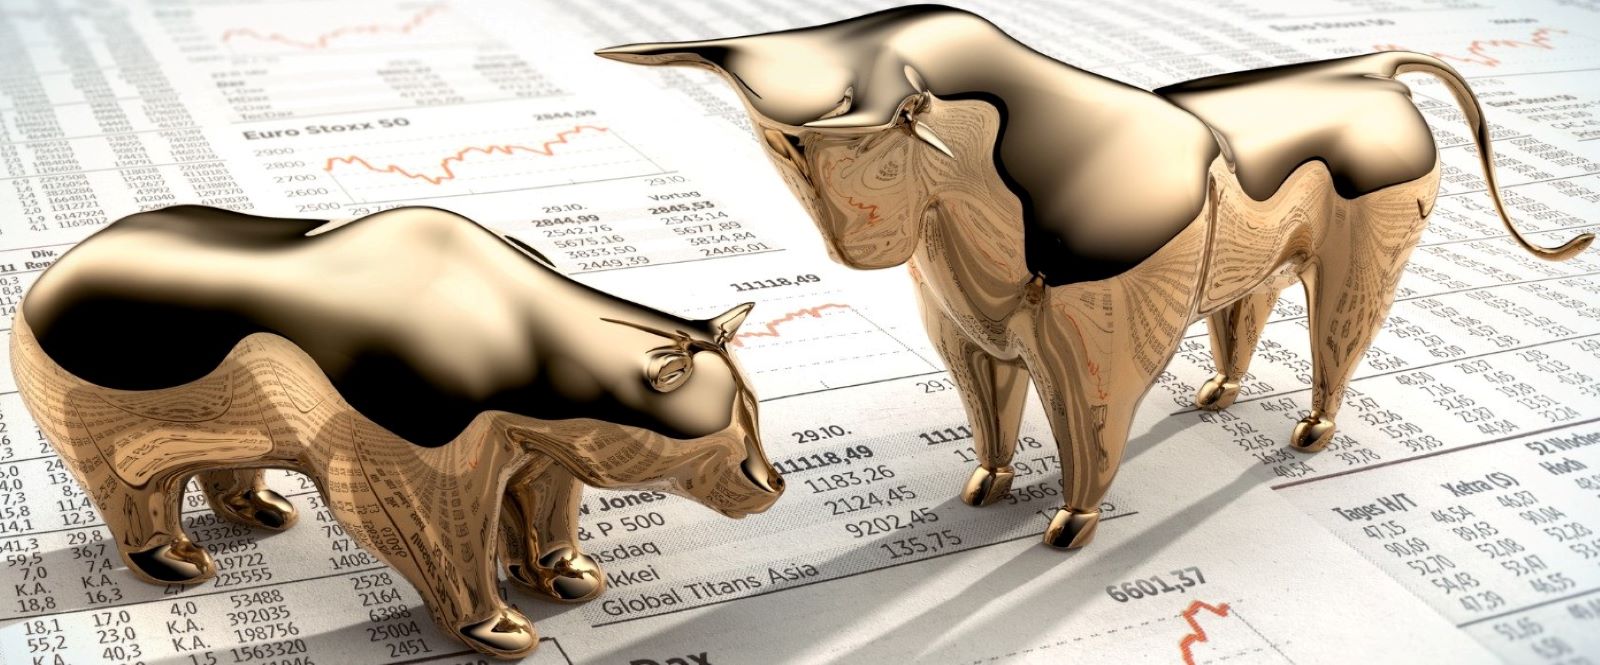 brass bull and brass bear standing on stock reports
